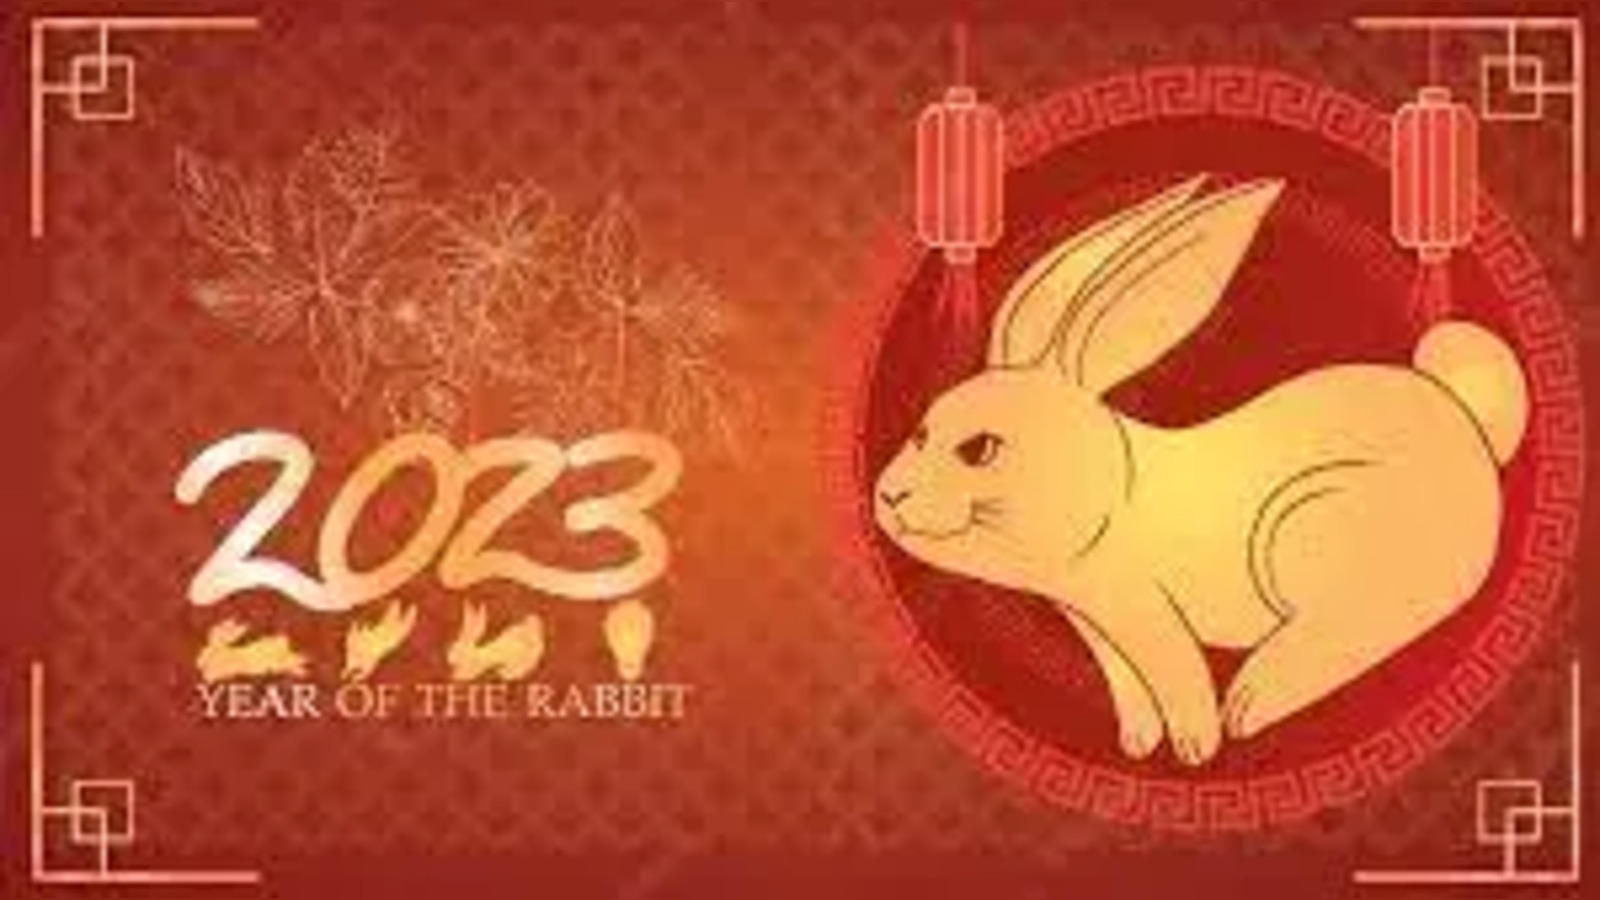 Chinese New Year 2023 - Greetings, Sayings & Traditions